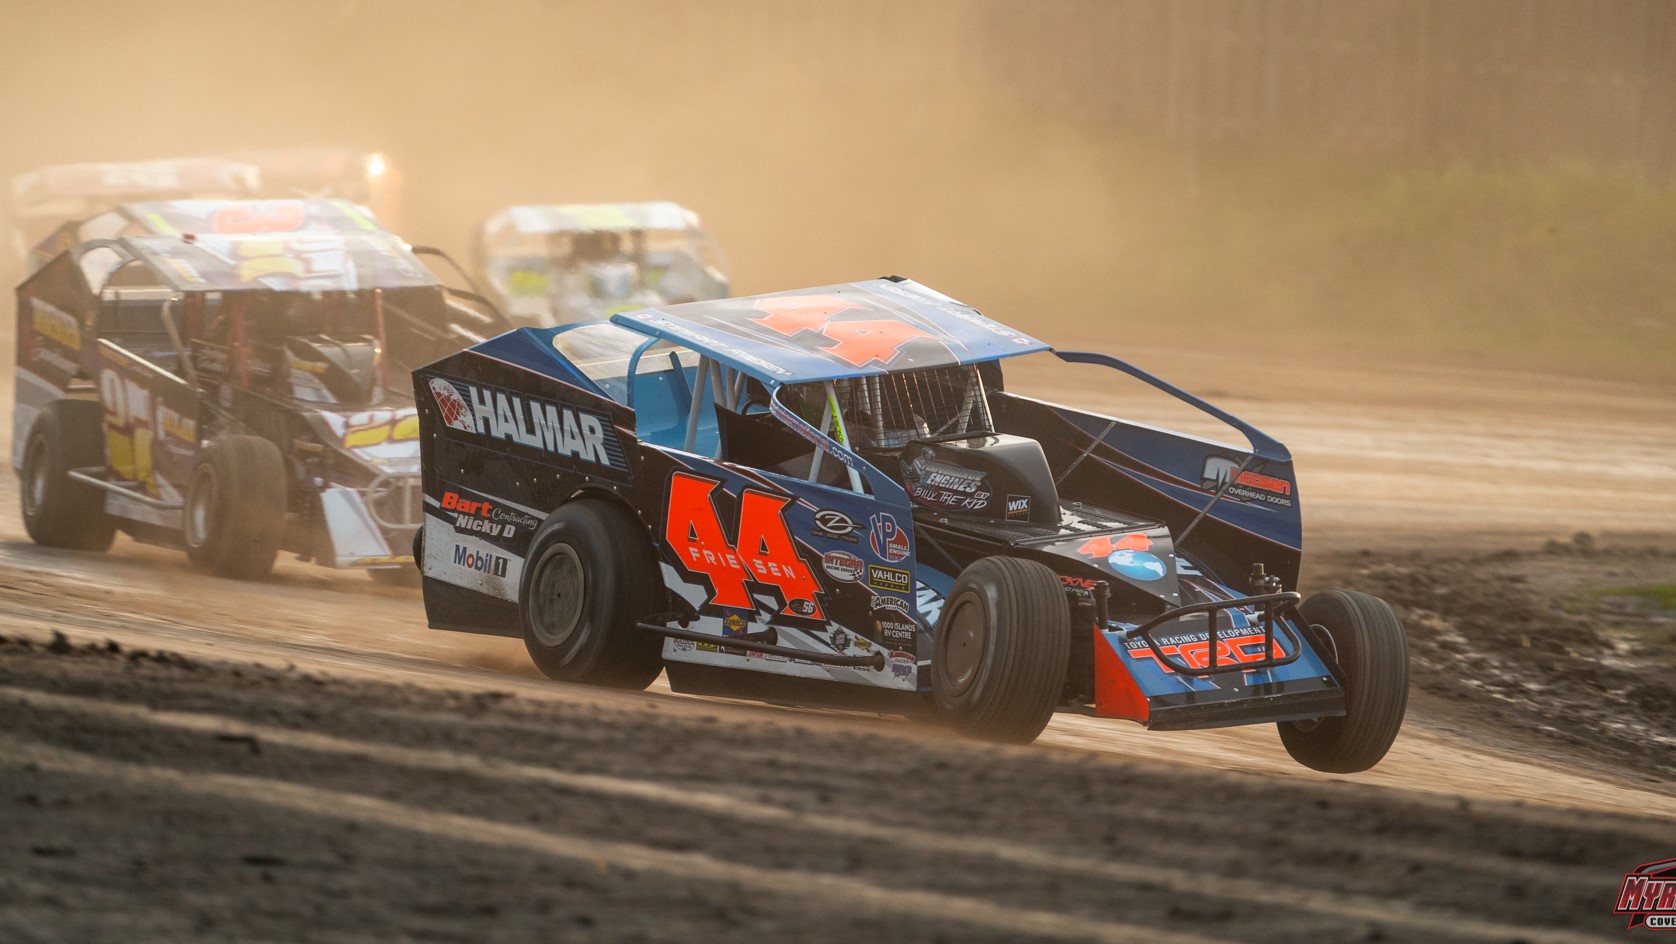 SHORT TRACK SUPER SERIES IS BACK IN ACTION SUNDAY, JULY 4 AT FONDA SPEEDWAY